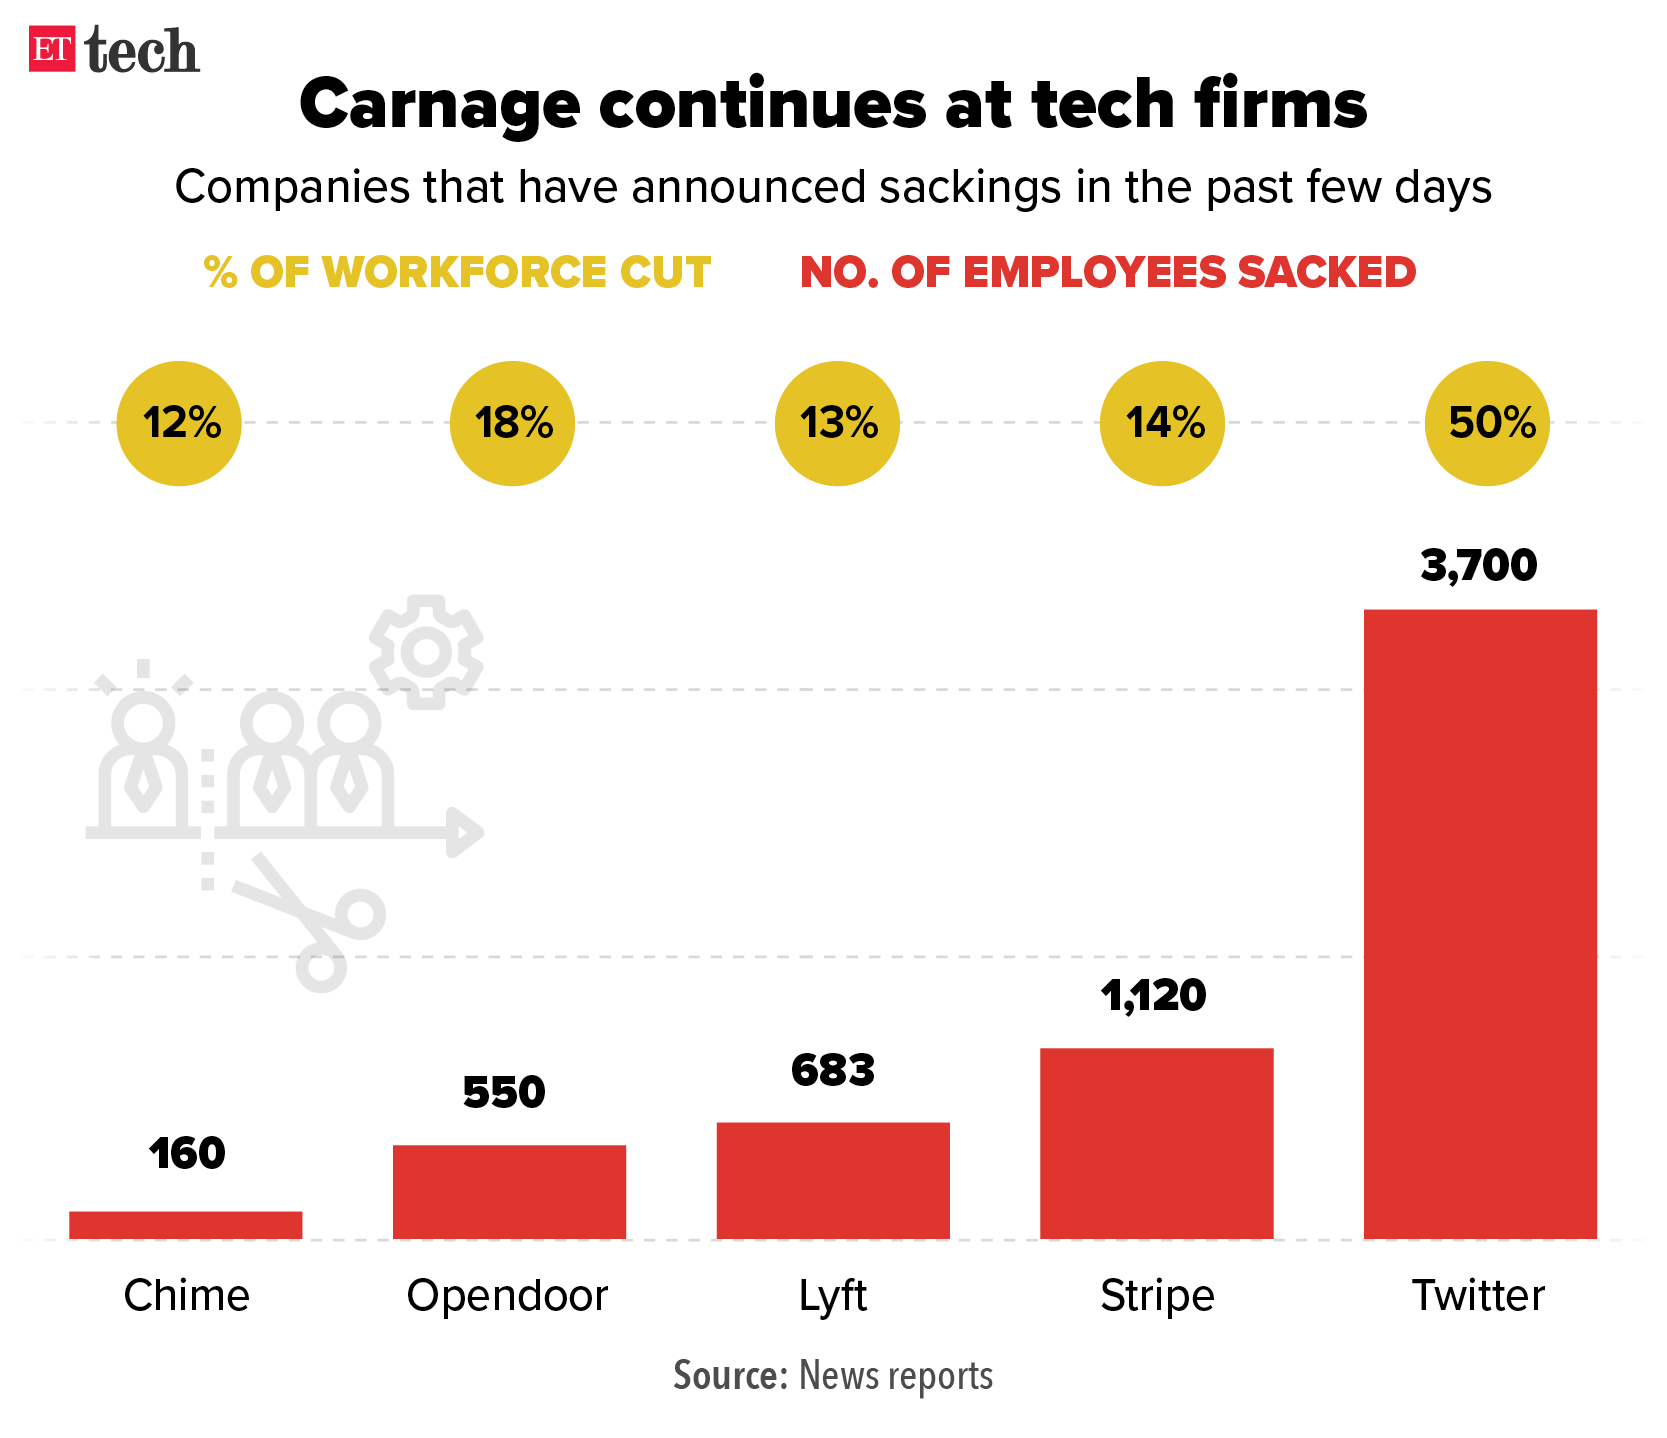 Carnage continues in technology companies_Graphic_ETTECH